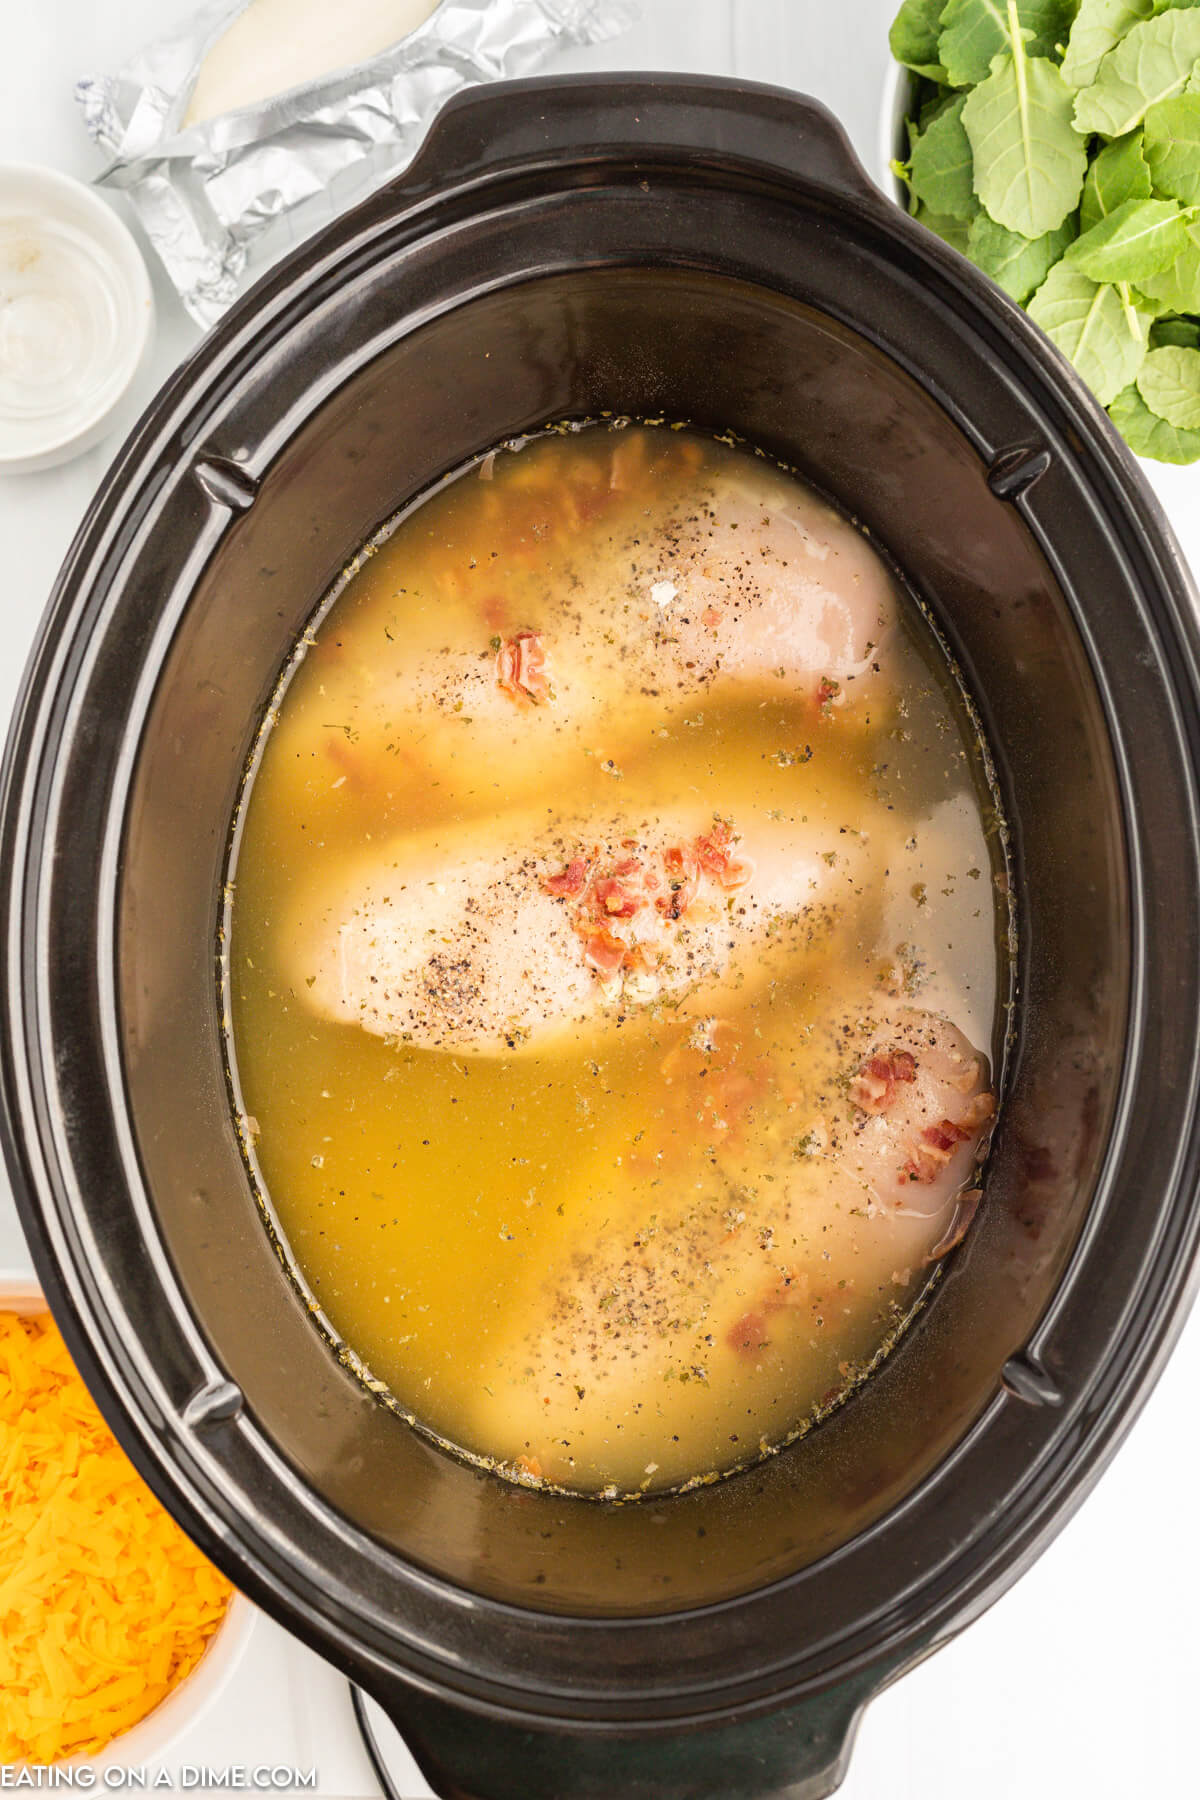 Placing chicken, broth, bacon, and seasoning in the slow cooker